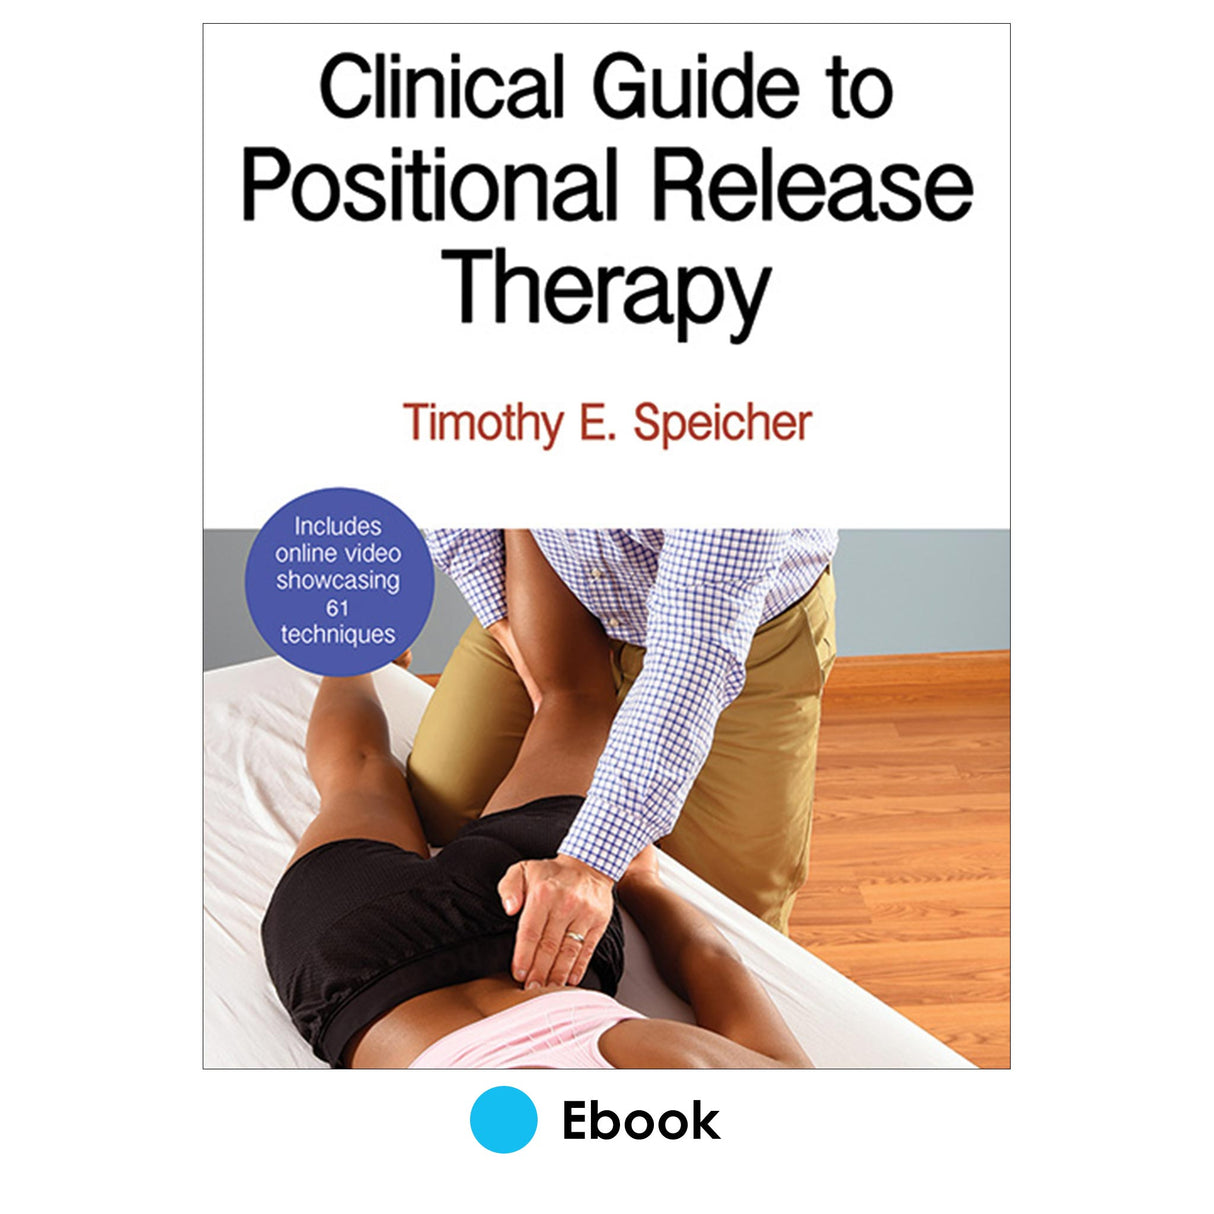 Clinical Guide to Positional Release Therapy PDF With Web Resource